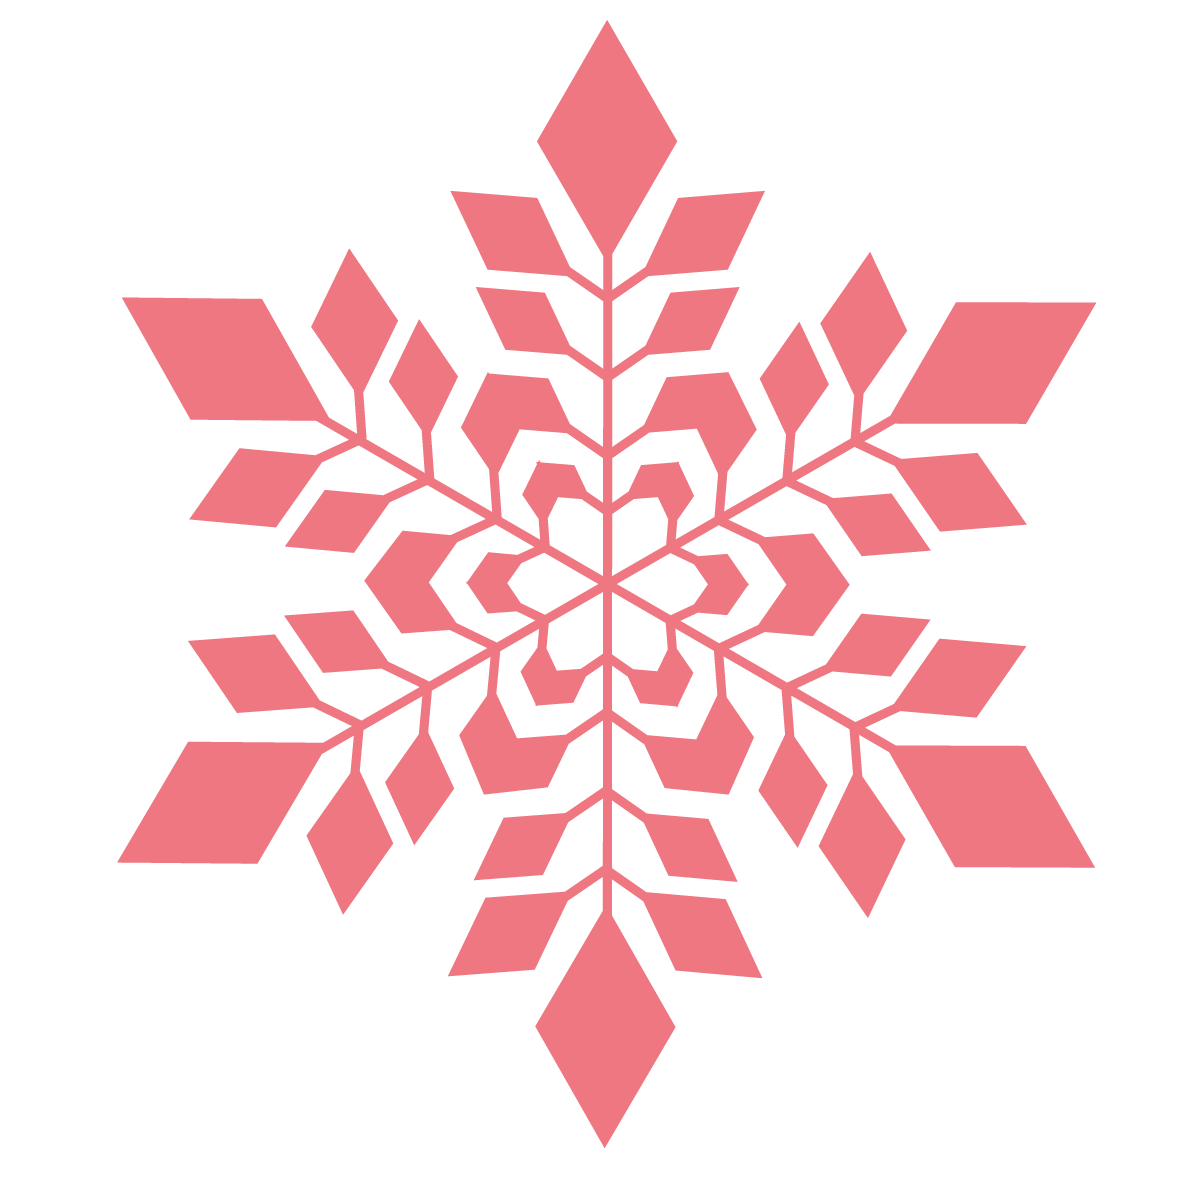 Transparent Snowflake Png Images & Pictures - Becuo